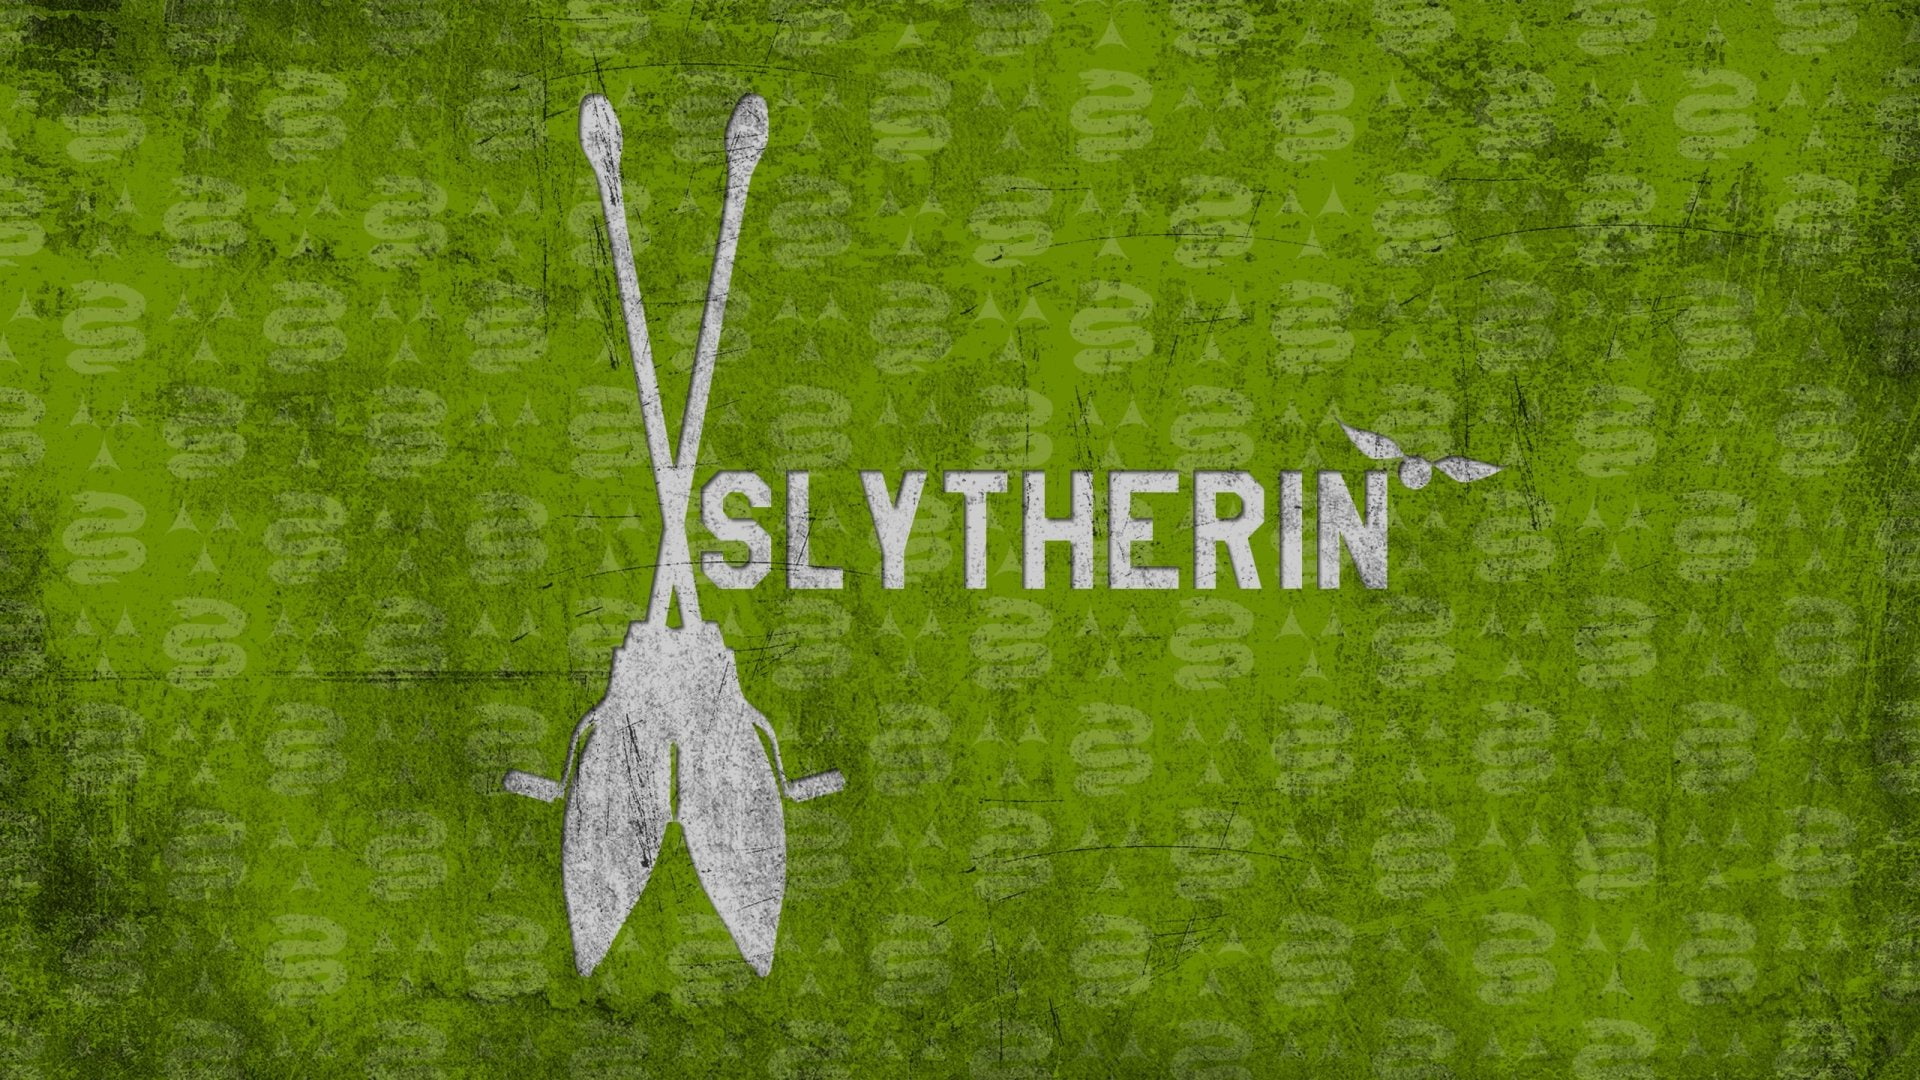 Harry Potter, Broom, Slytherin, green color, text, communication